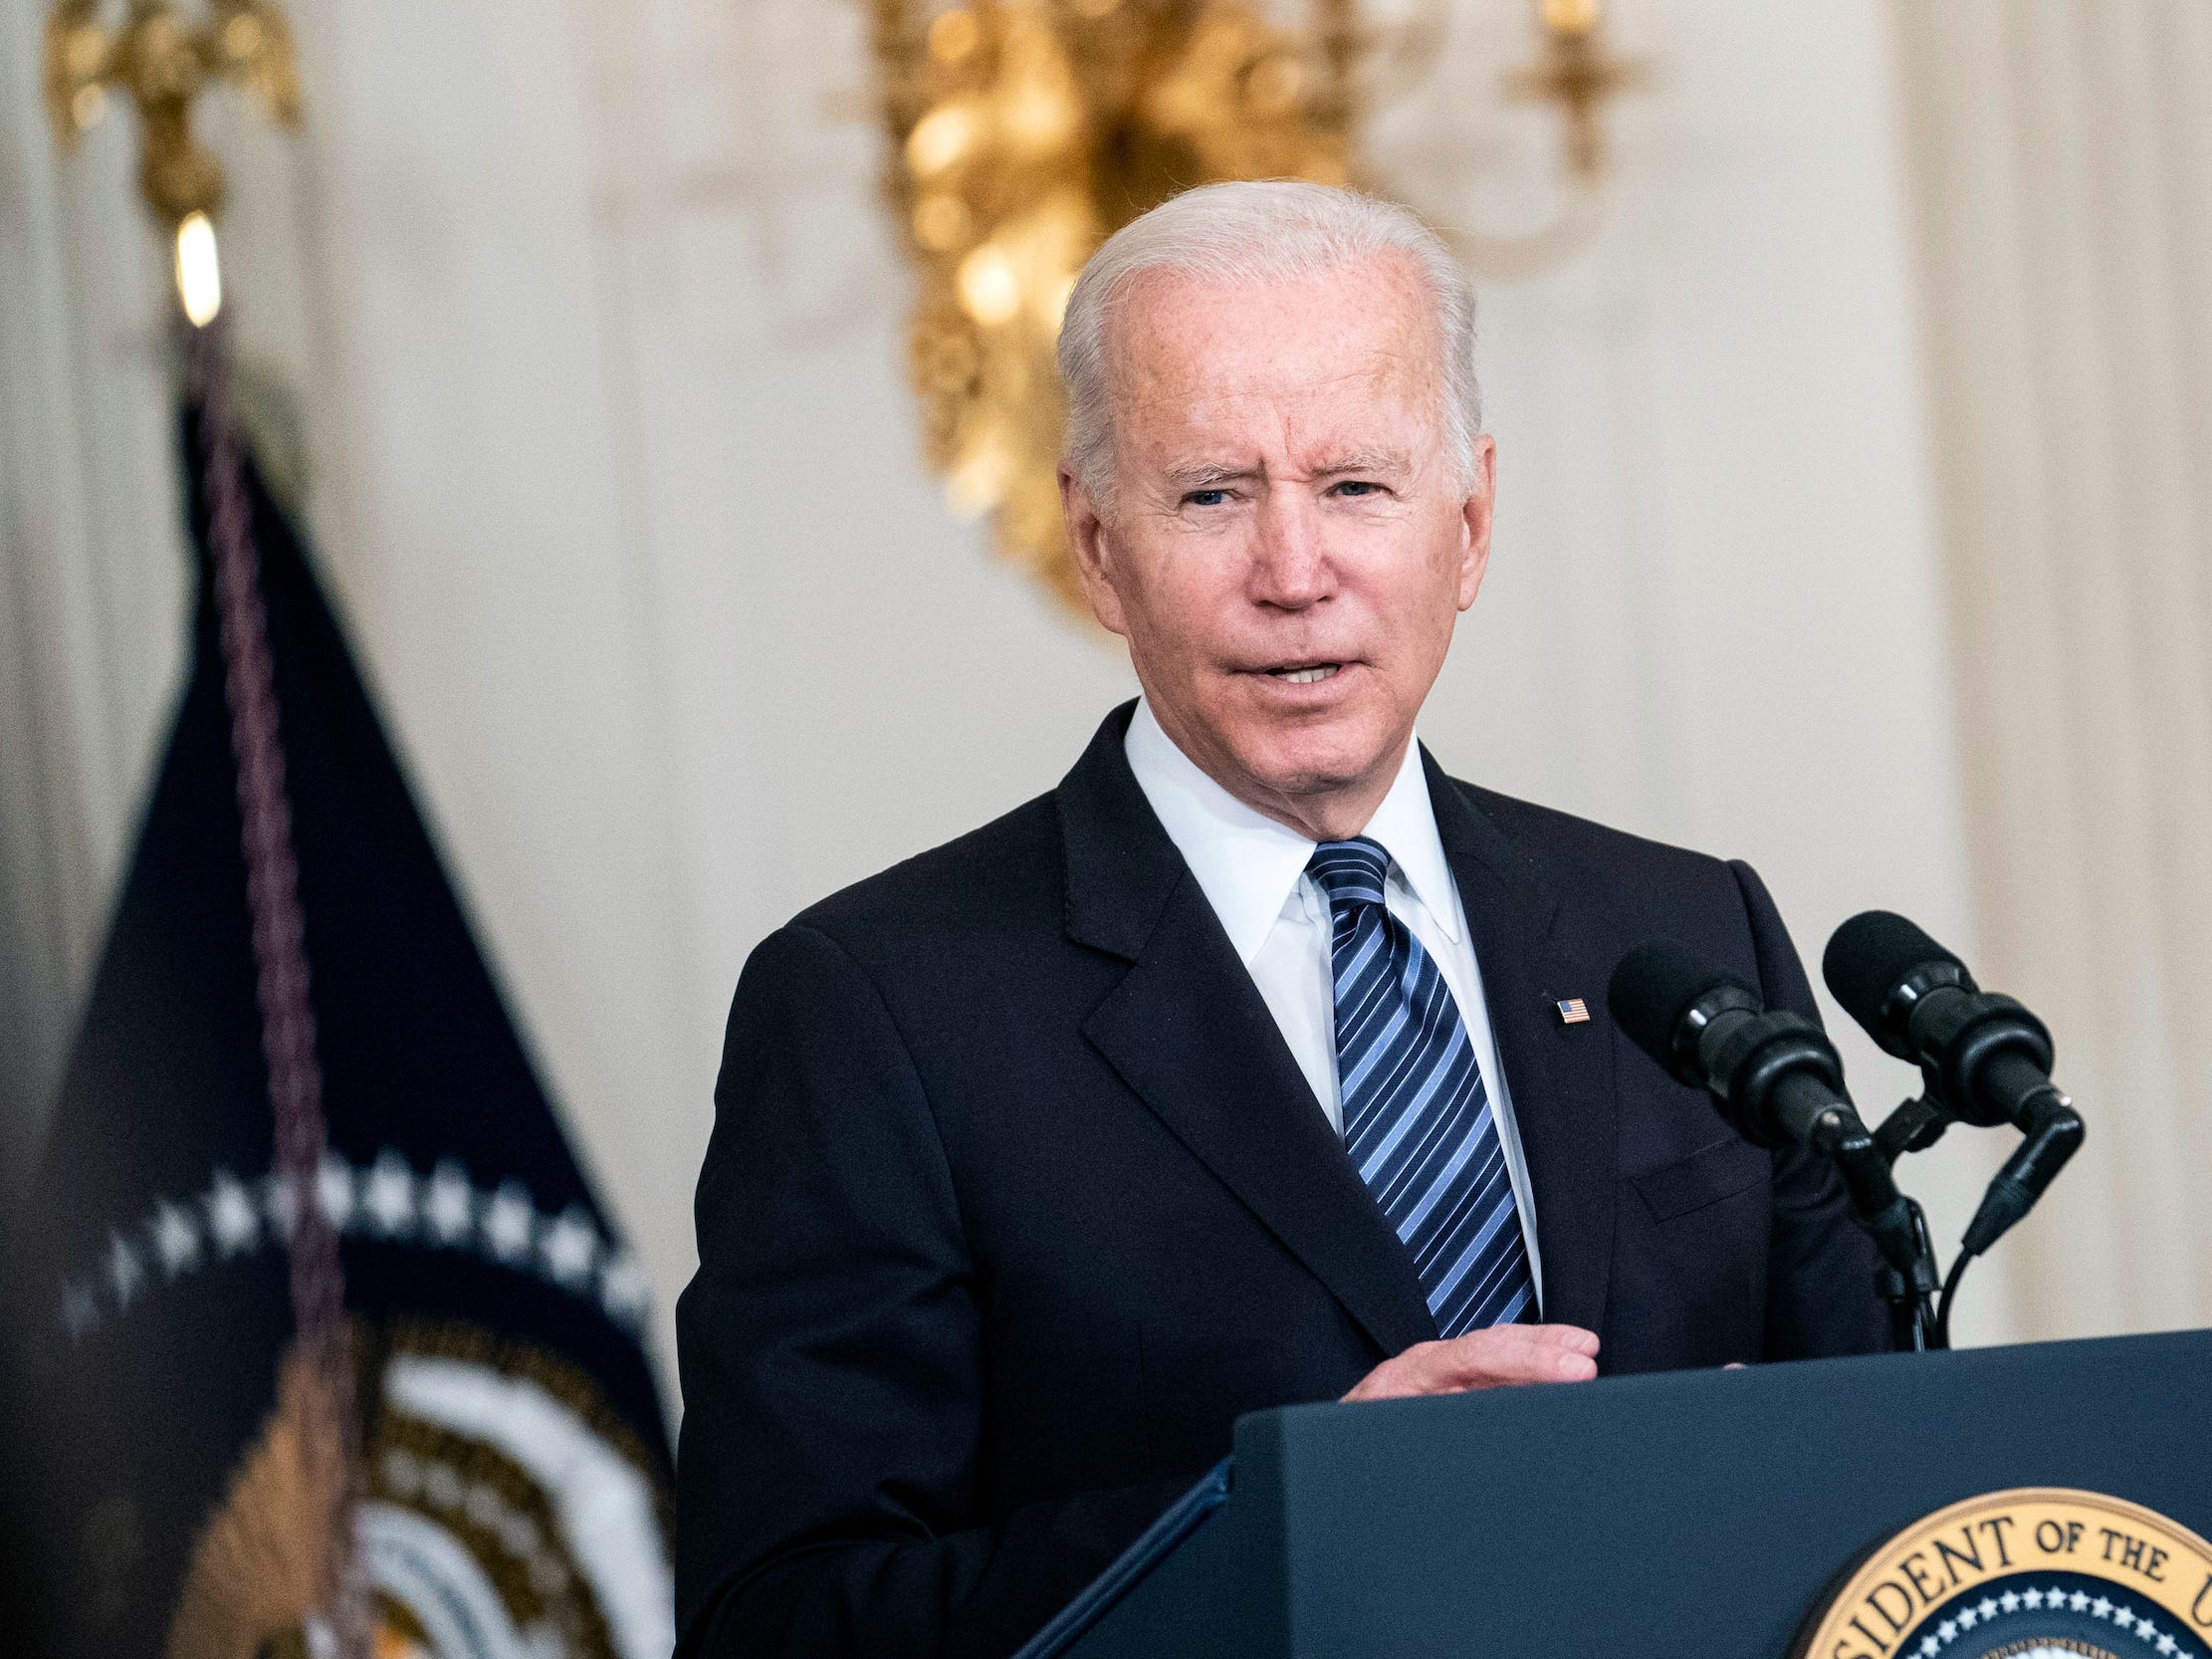 President Joe Biden delivers remarks on the October jobs reports in the State Dining Room at the White House on November 5, 2021 in Washington, DC.